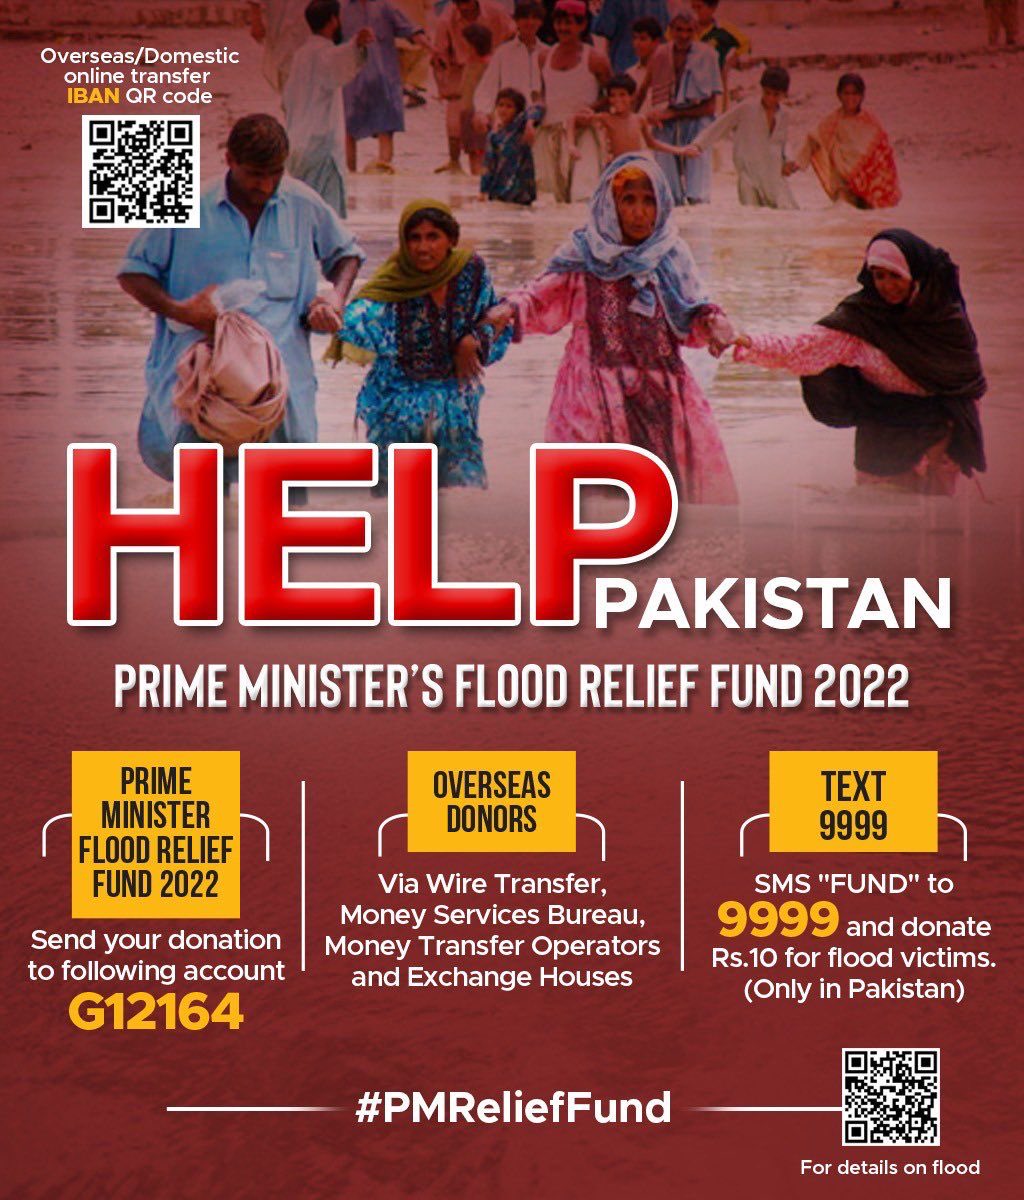 Pls put in your share. We owe it to our brothers, sisters and children in need & distress.